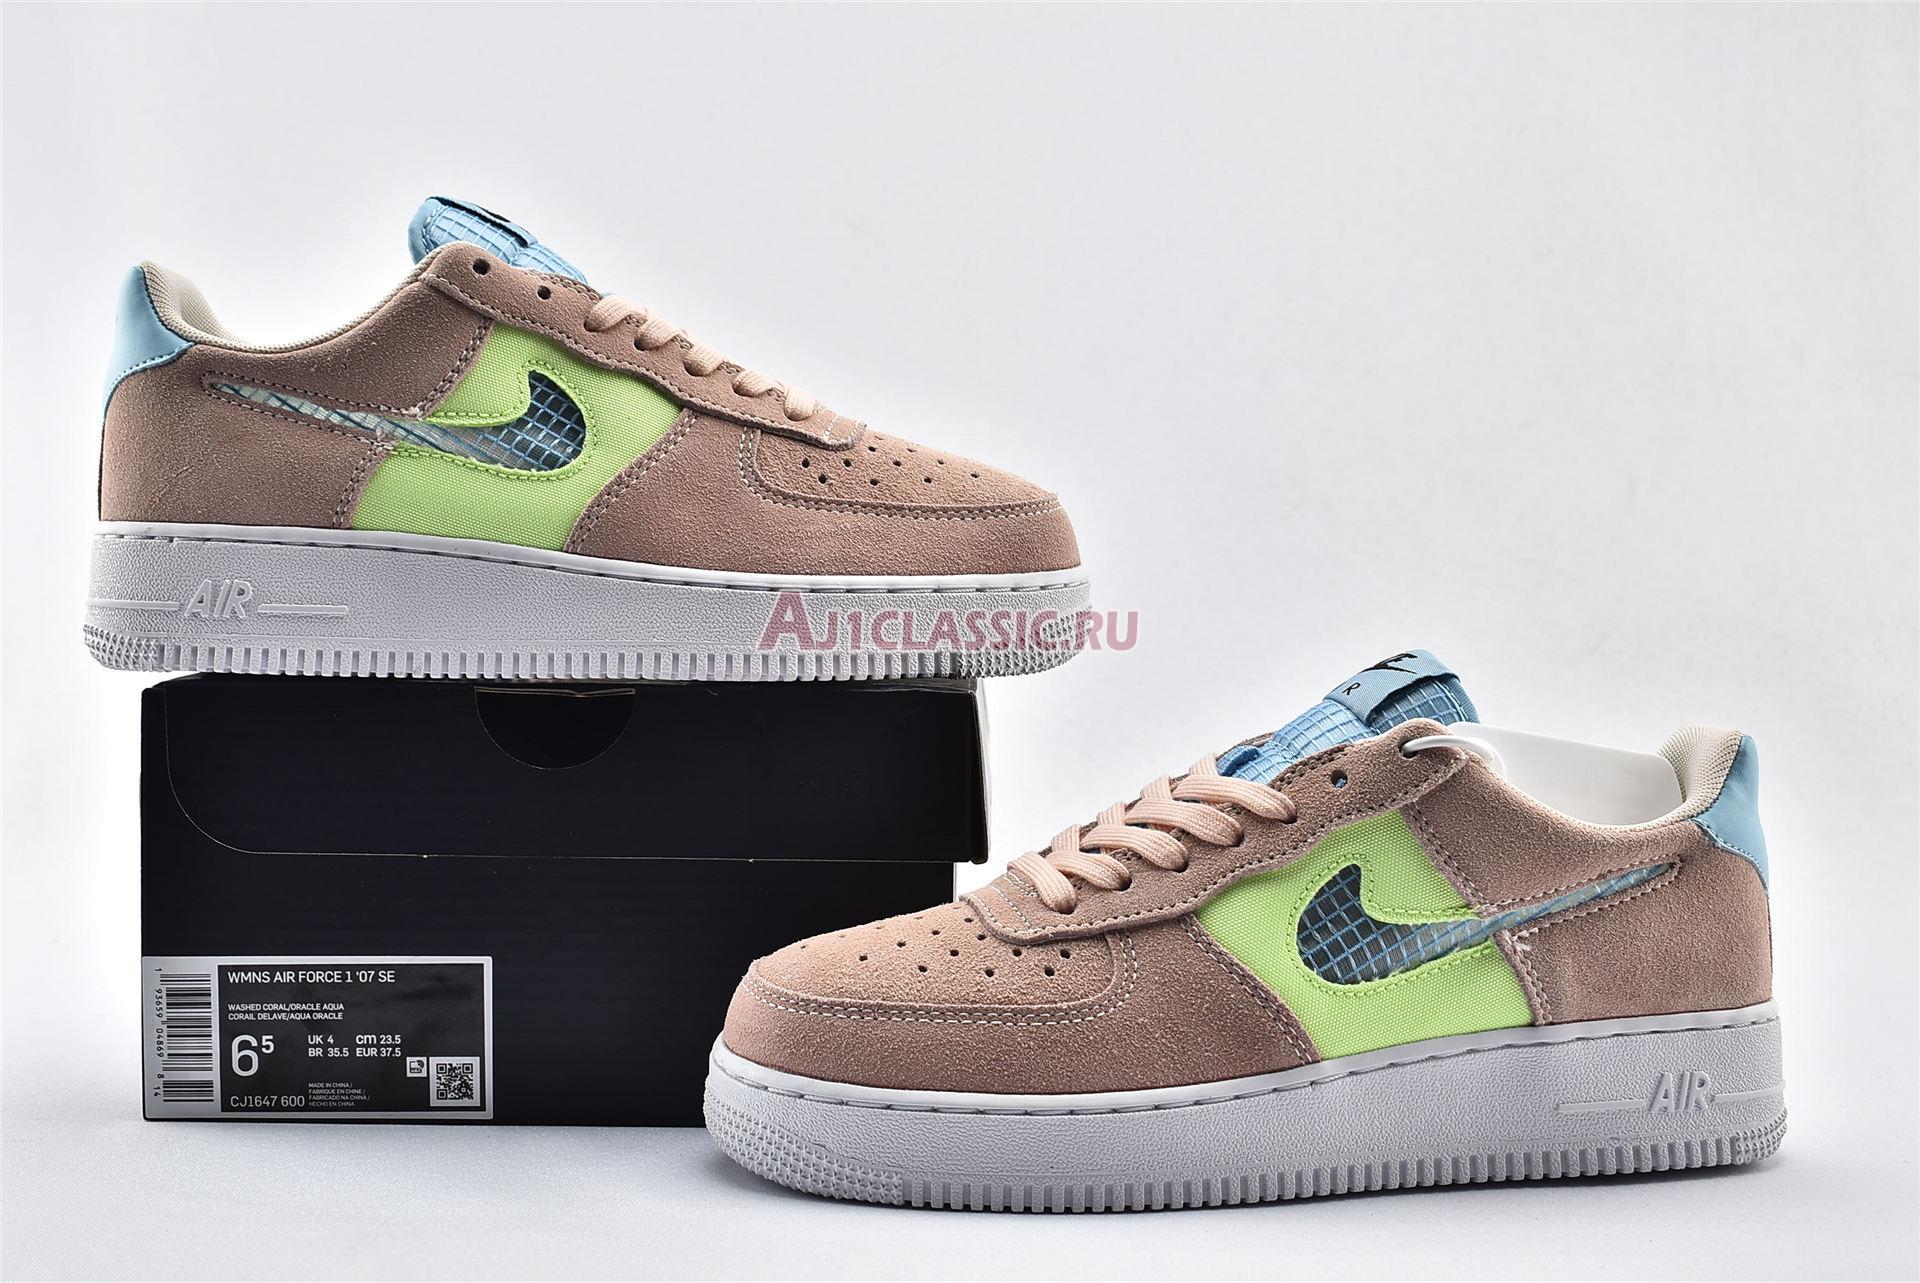 Nike Air Force 1 Low "Cut Out Pink" CJ1647-600